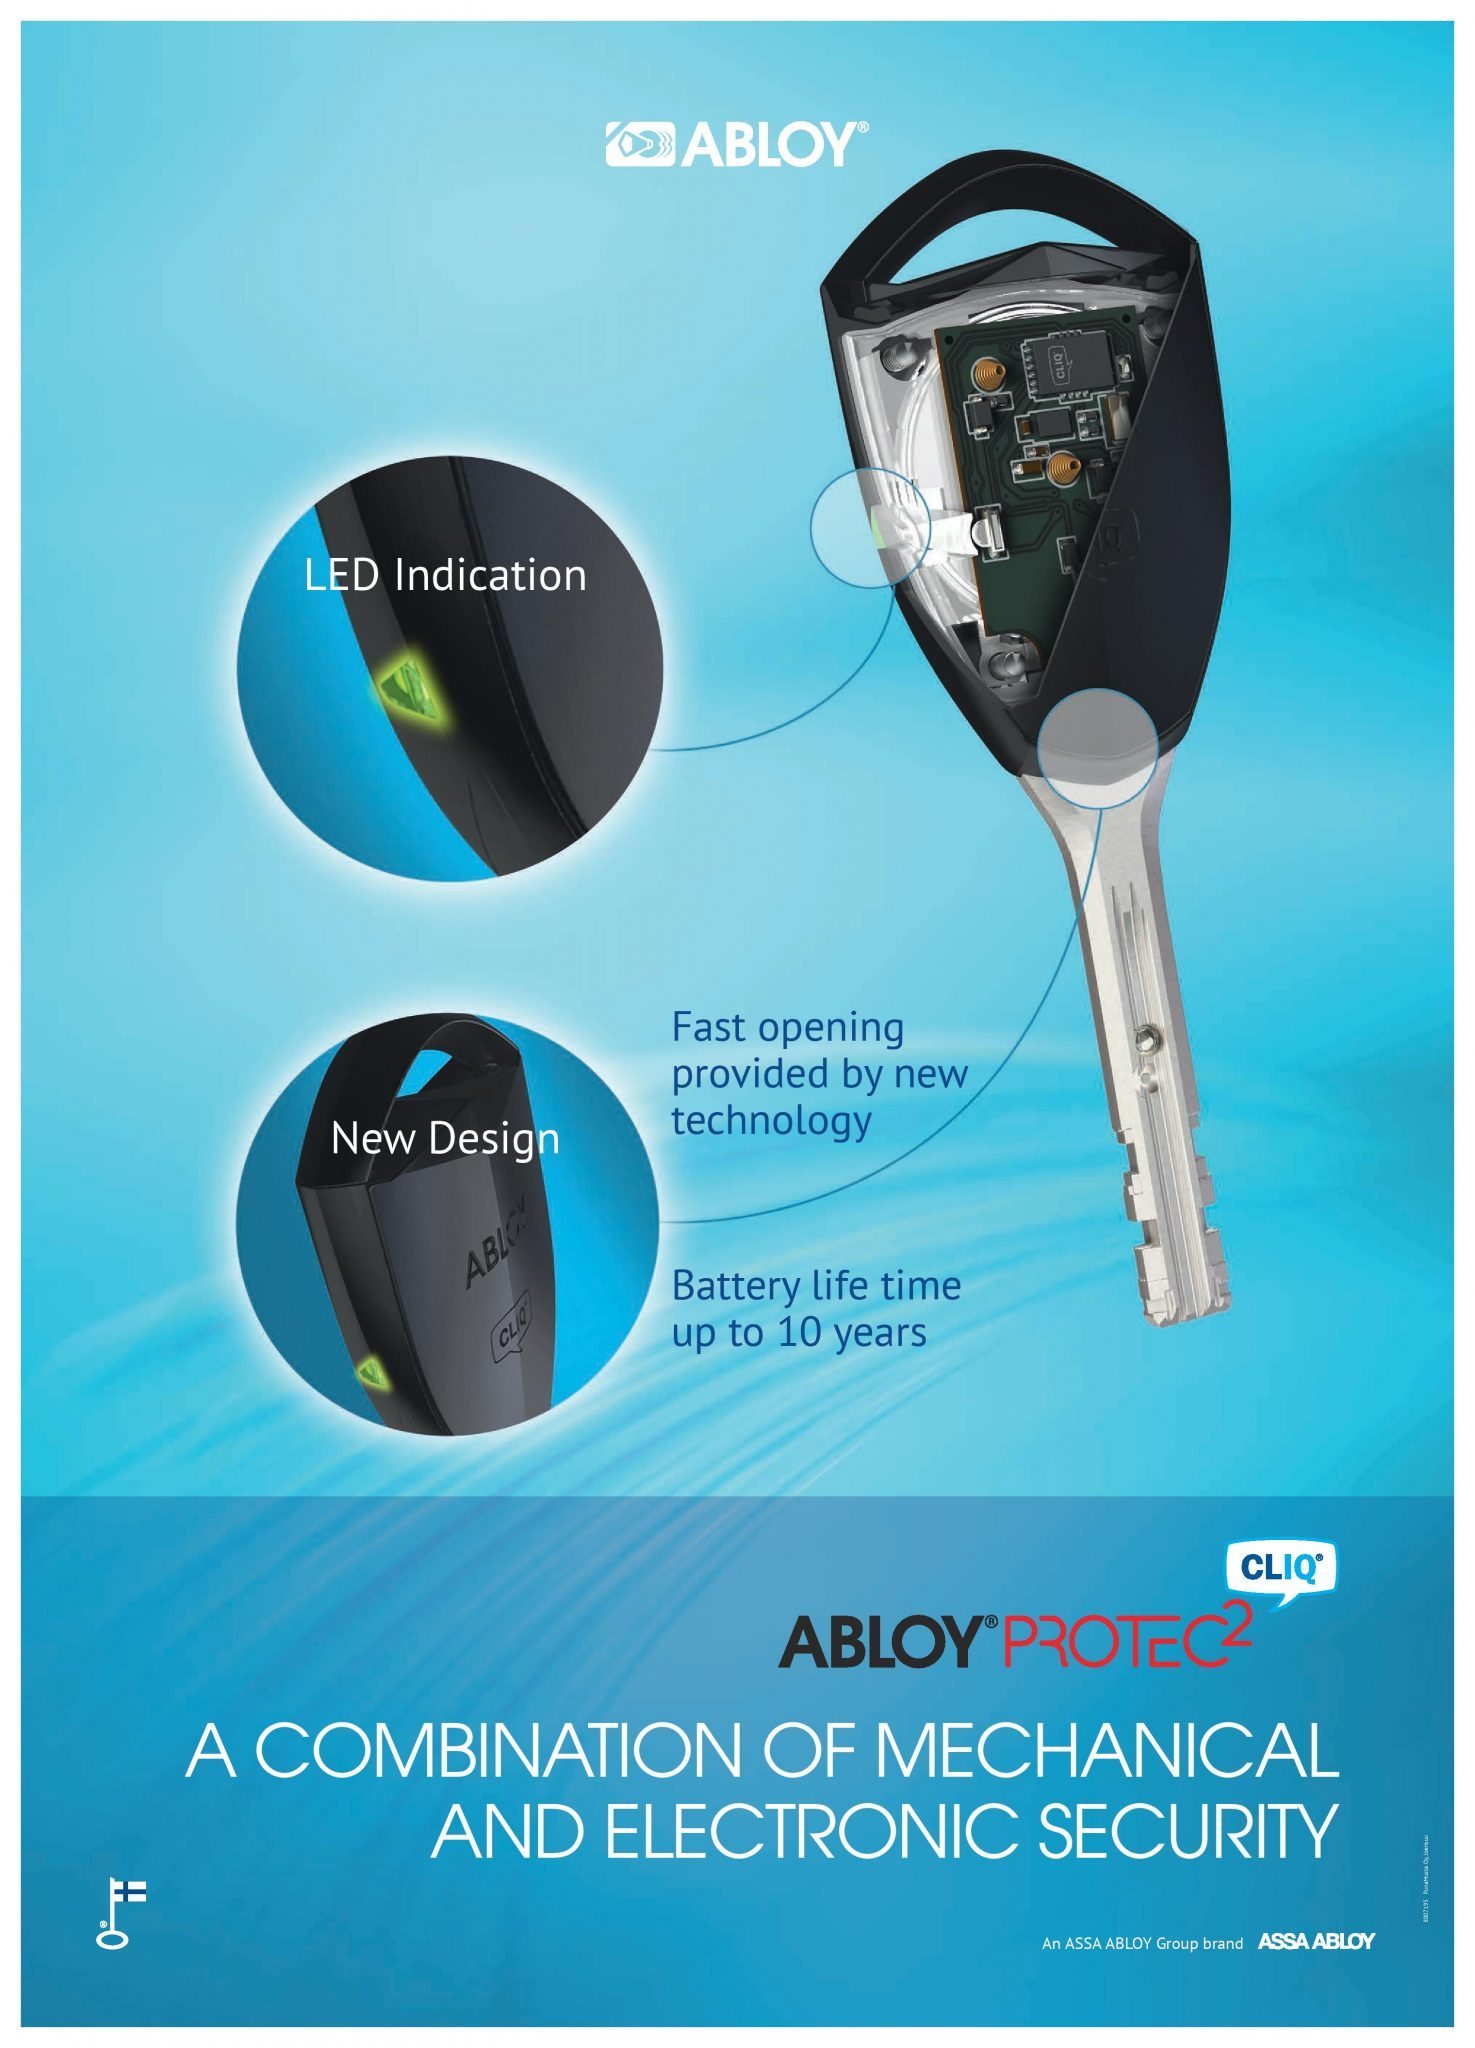 8807195_ABLOY_PROTEC2_CLIQ_poster-page-001